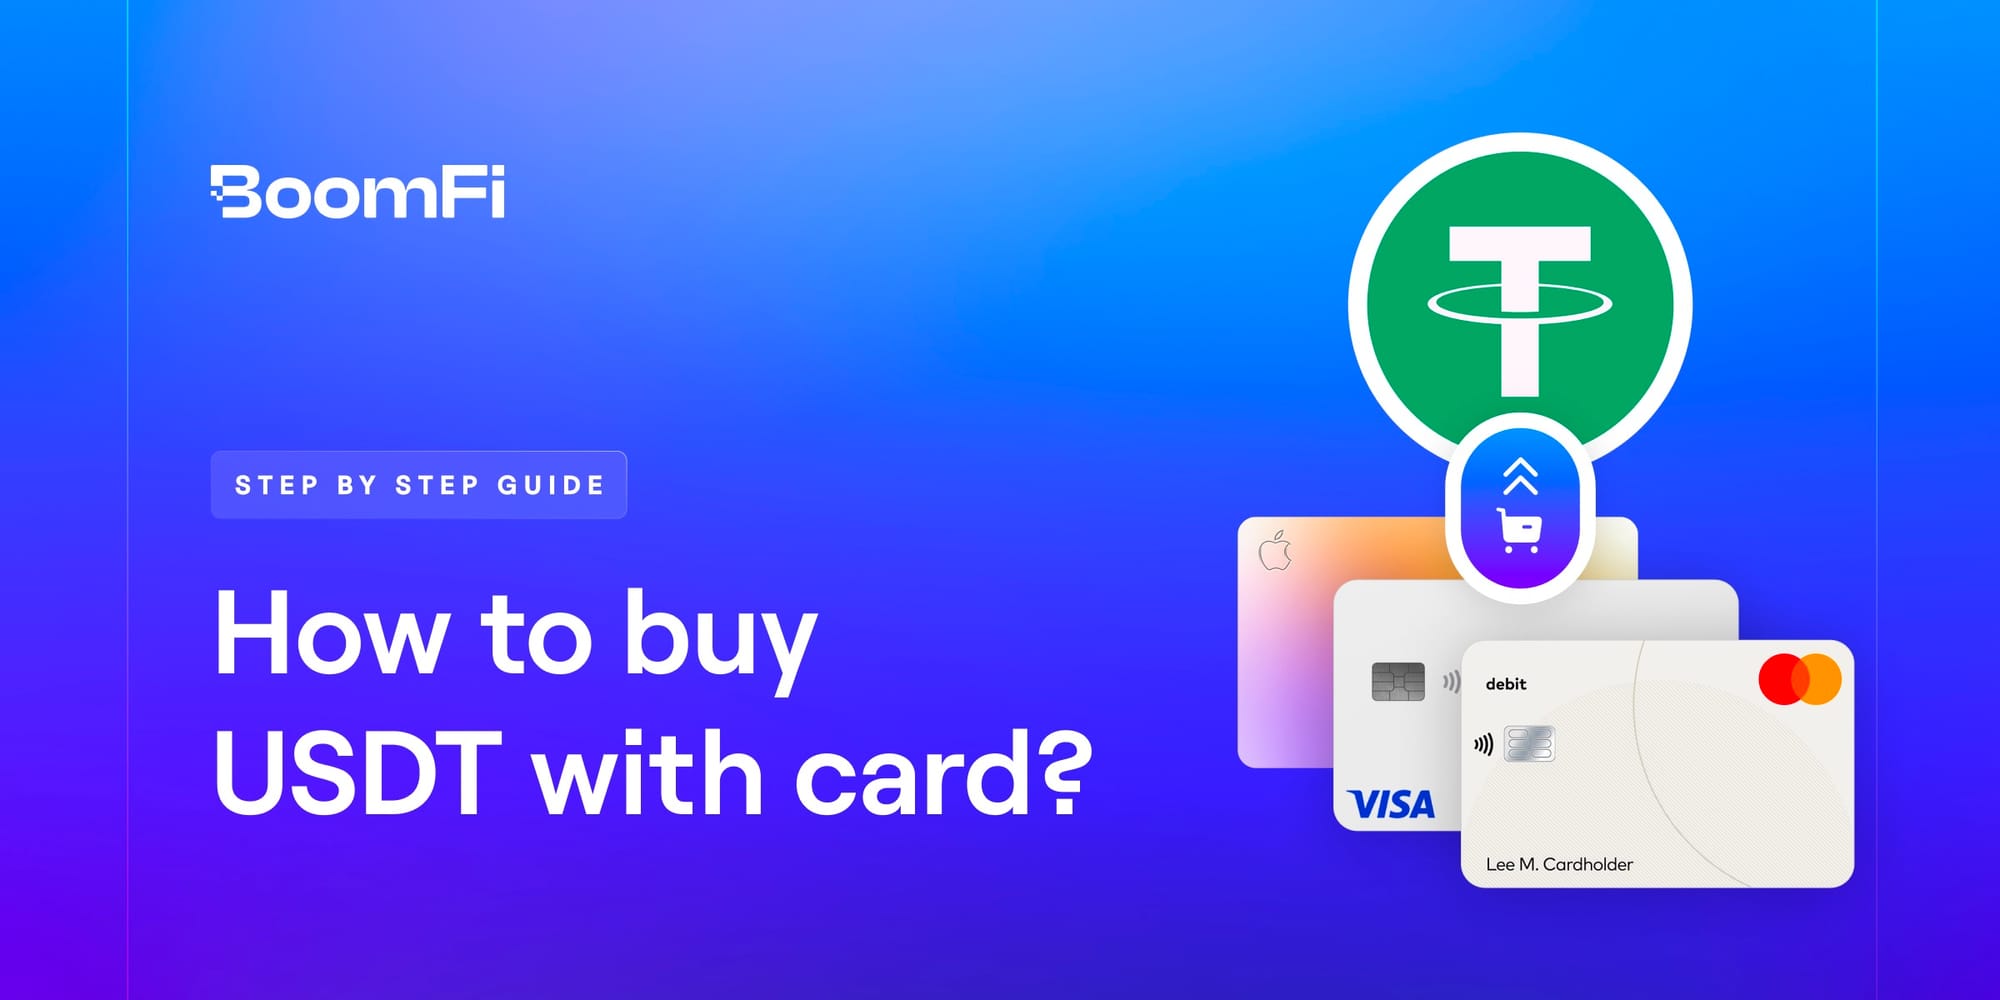 How to Buy USDT with a Credit or Debit Card